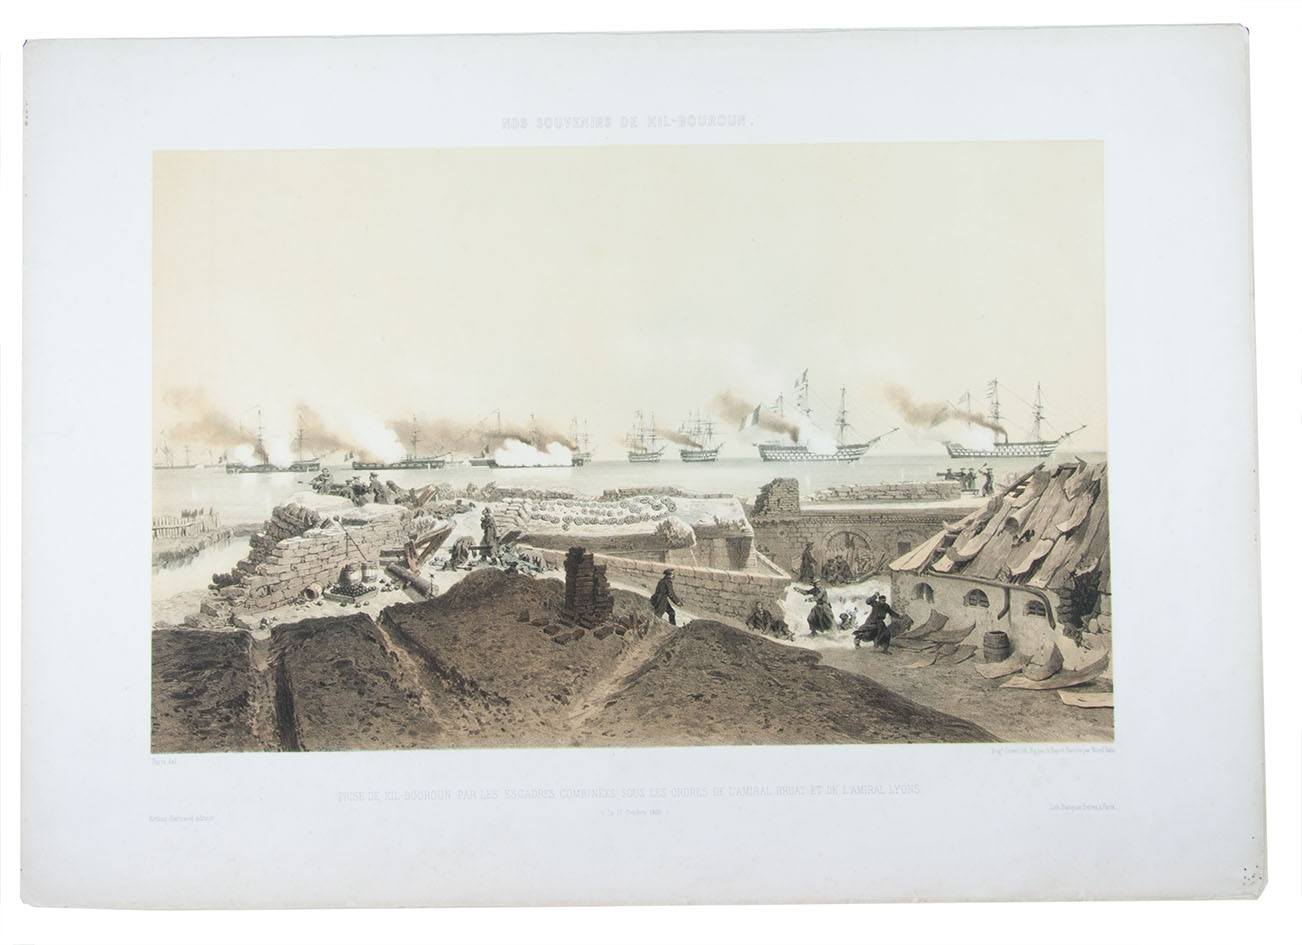 CRIMEAN WARS]. PARIS, [Edouard?], Adolphe BAYOT, Eugne CICRI, Antoine Lon MOREL FATTO. - Nos souvenirs de Kil-Bouroun pendant l'hiver pass dans le liman du Dnieper 1855-1856.  Album lithographi  Paris, Arthus-Bertrand (printed by Becquet frres), [1856]. 1mo (63 x 46 cm). An album of views, most including ships on the river, from the Battle of Kinburn in the Crimean War, comprising 17 plates: 1 tinted lithographed title-page, 15 tinted and double-tinted lithographed views (image size 30 x 46 cm) and a lithographed map. Many views also coloured by hand. Later half blue cloth portfolio.